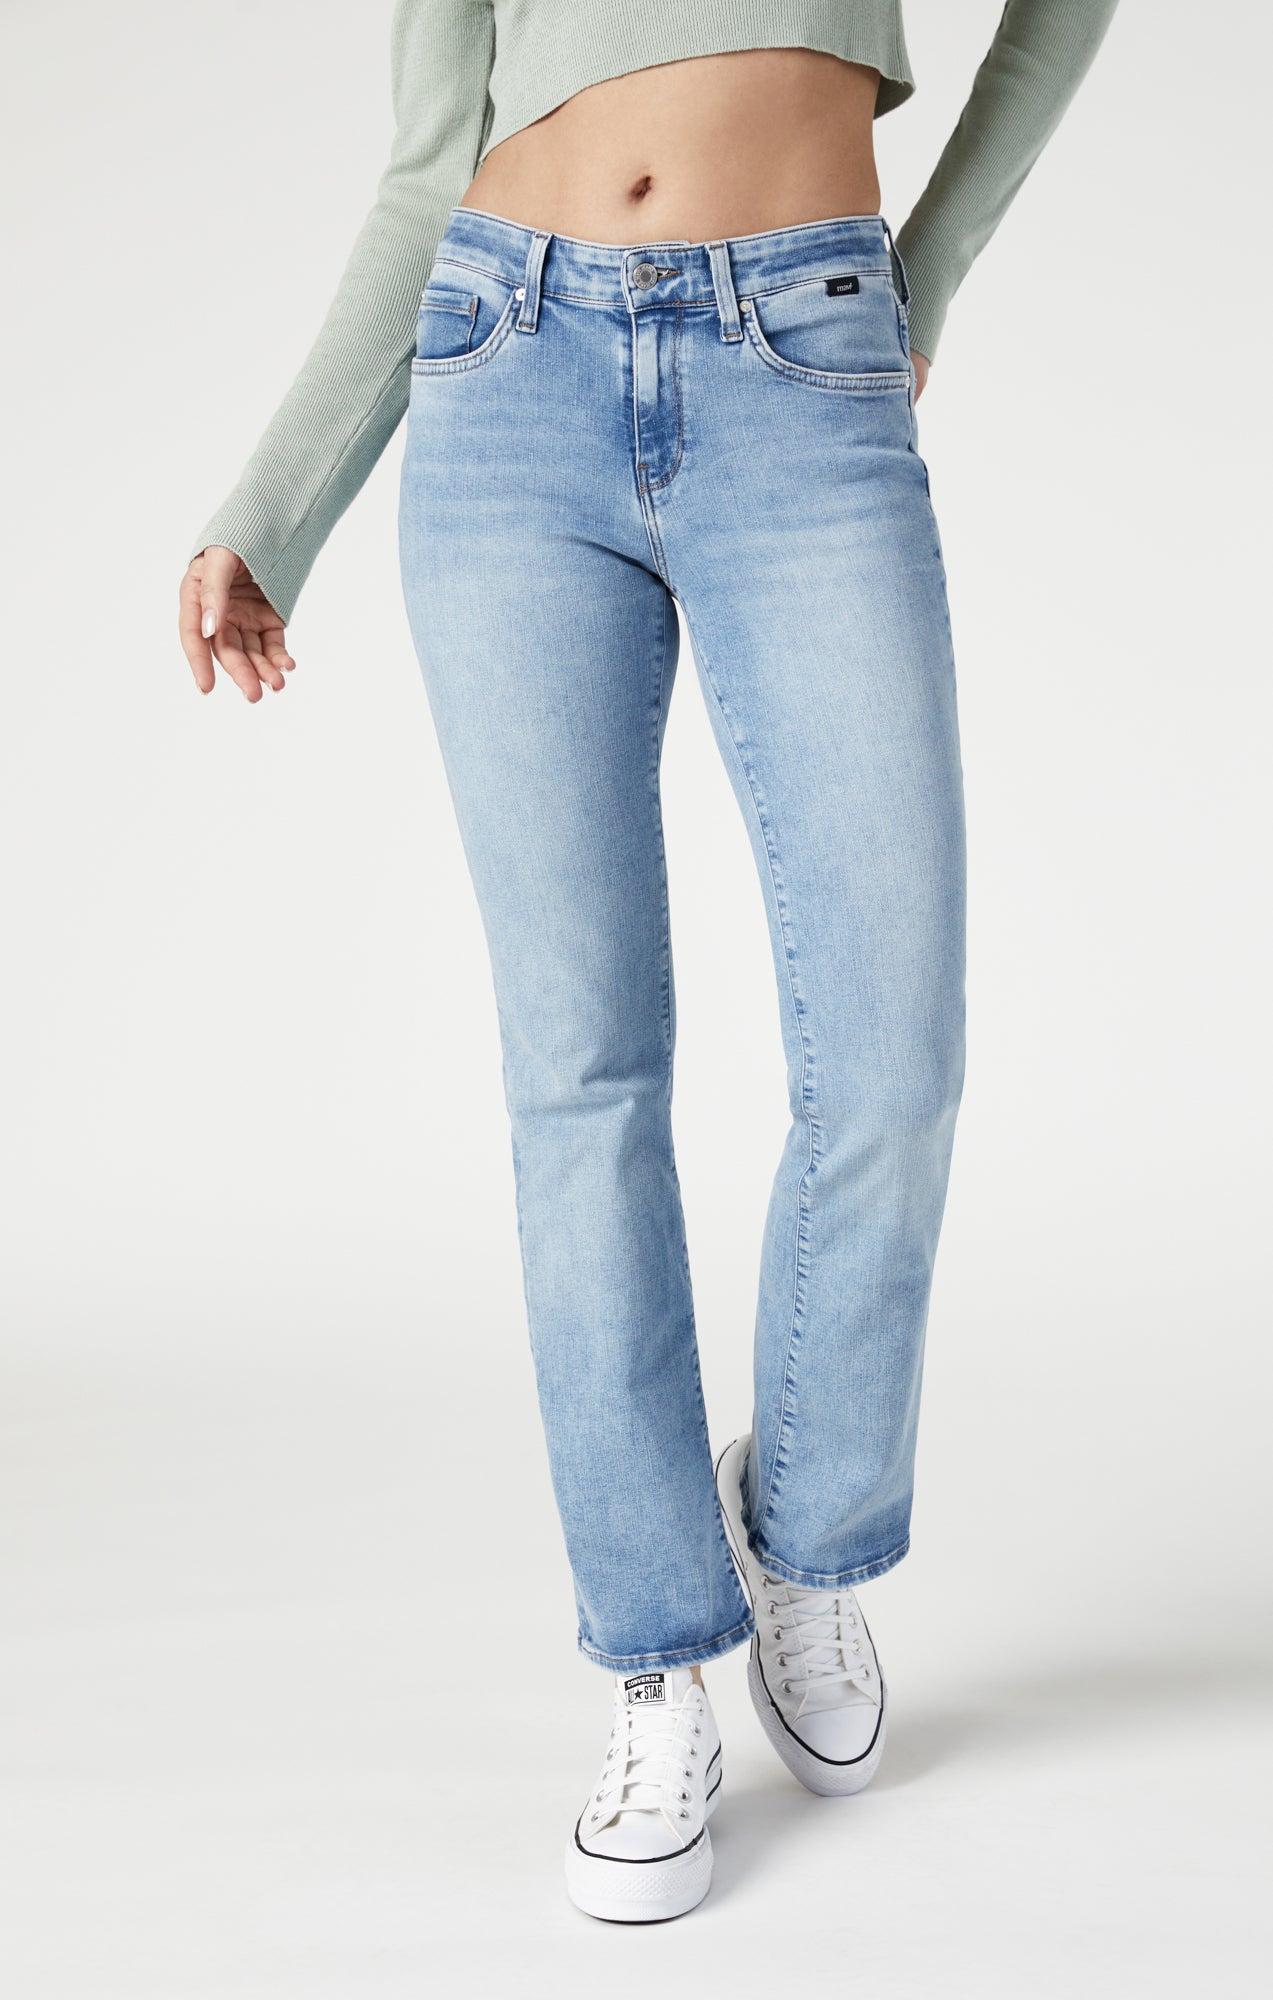 Lazy Oaf Rainbow Bum Jeans in Blue